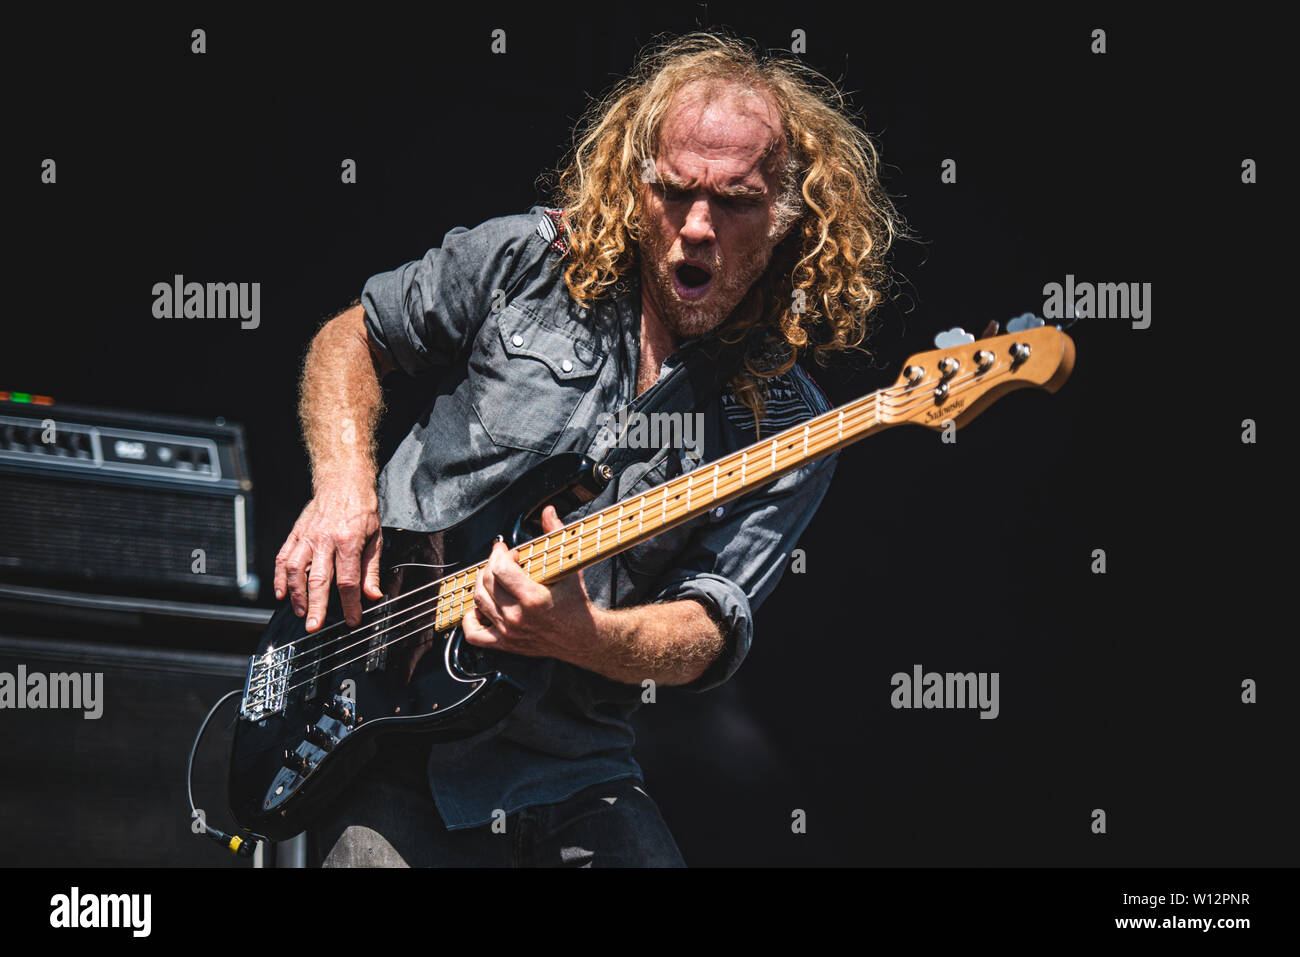 Mike Dean, bassist of the American heavy metal band Corrosion Of Conformity, performing live on stage in Bologna, at the Bologna Sonic Park 2019 first Stock Photo